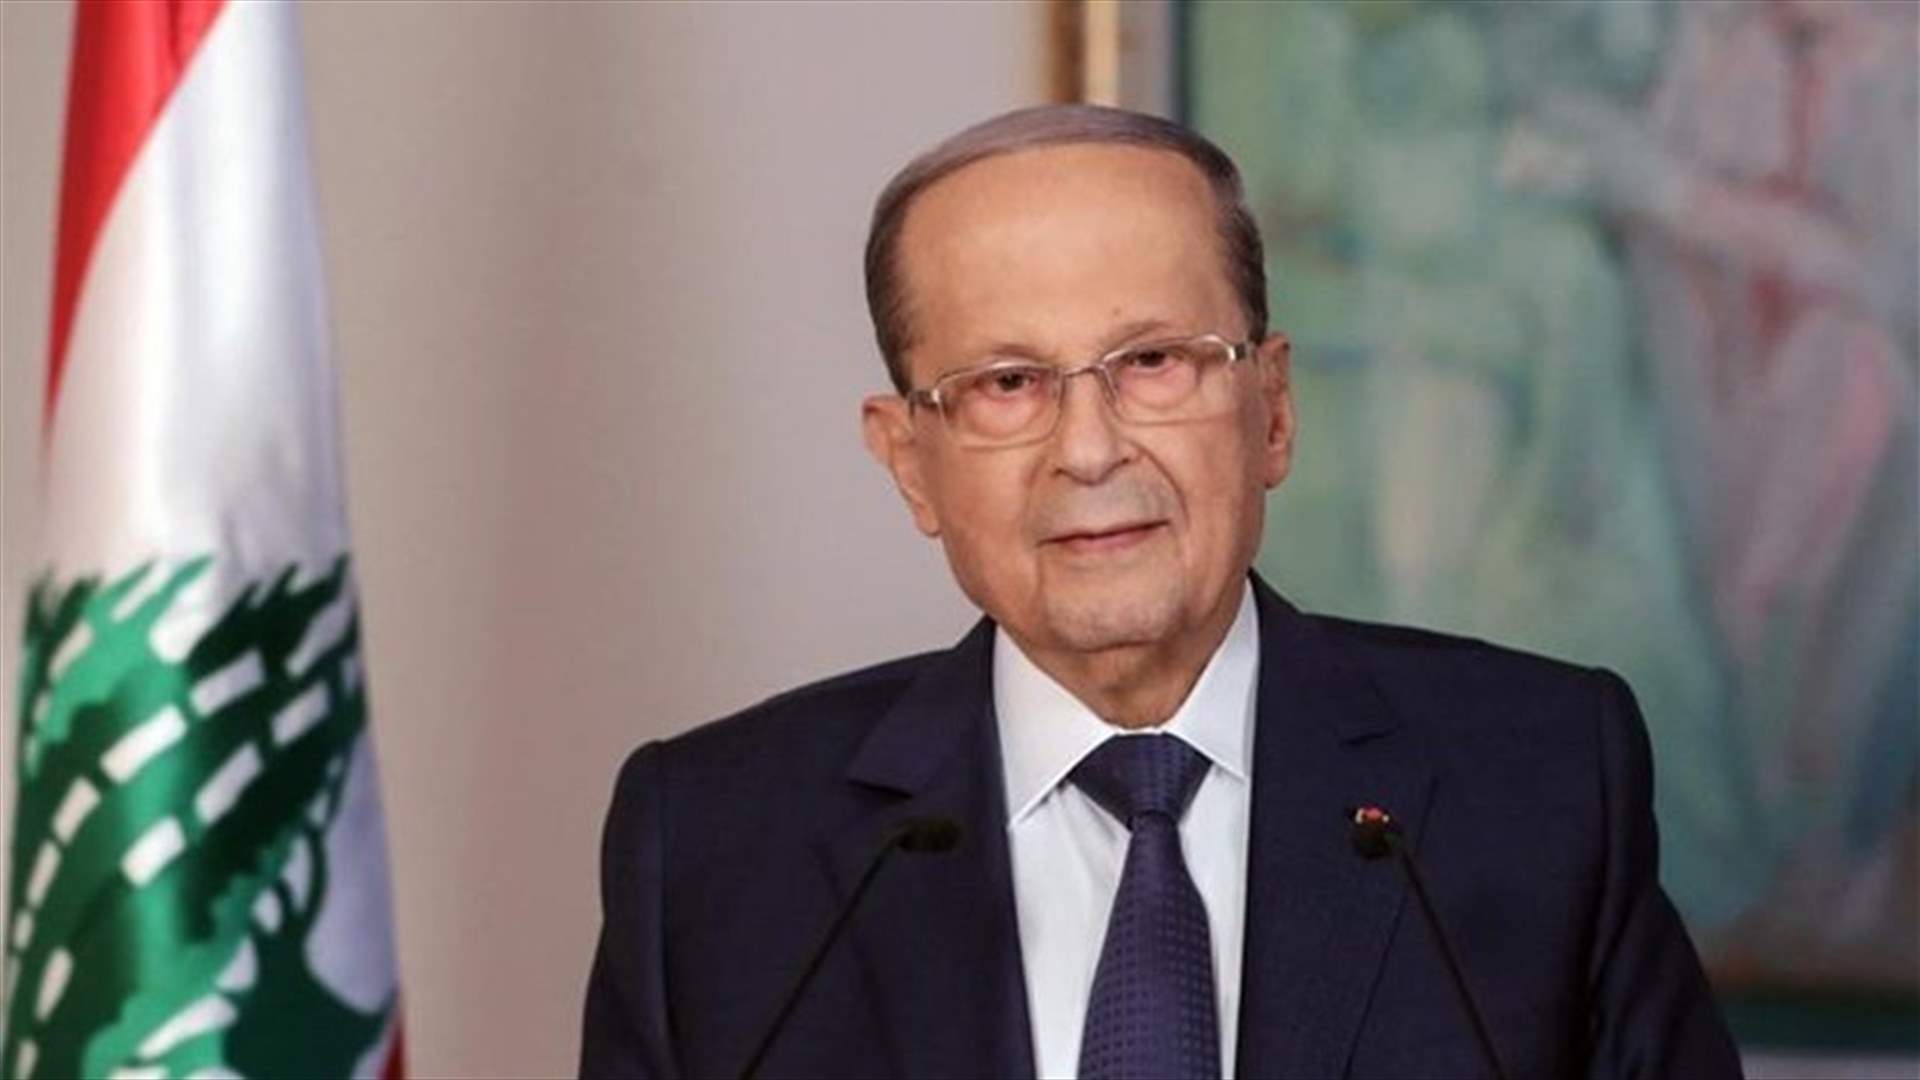 President Aoun pledges cabinet of technocrats in new government